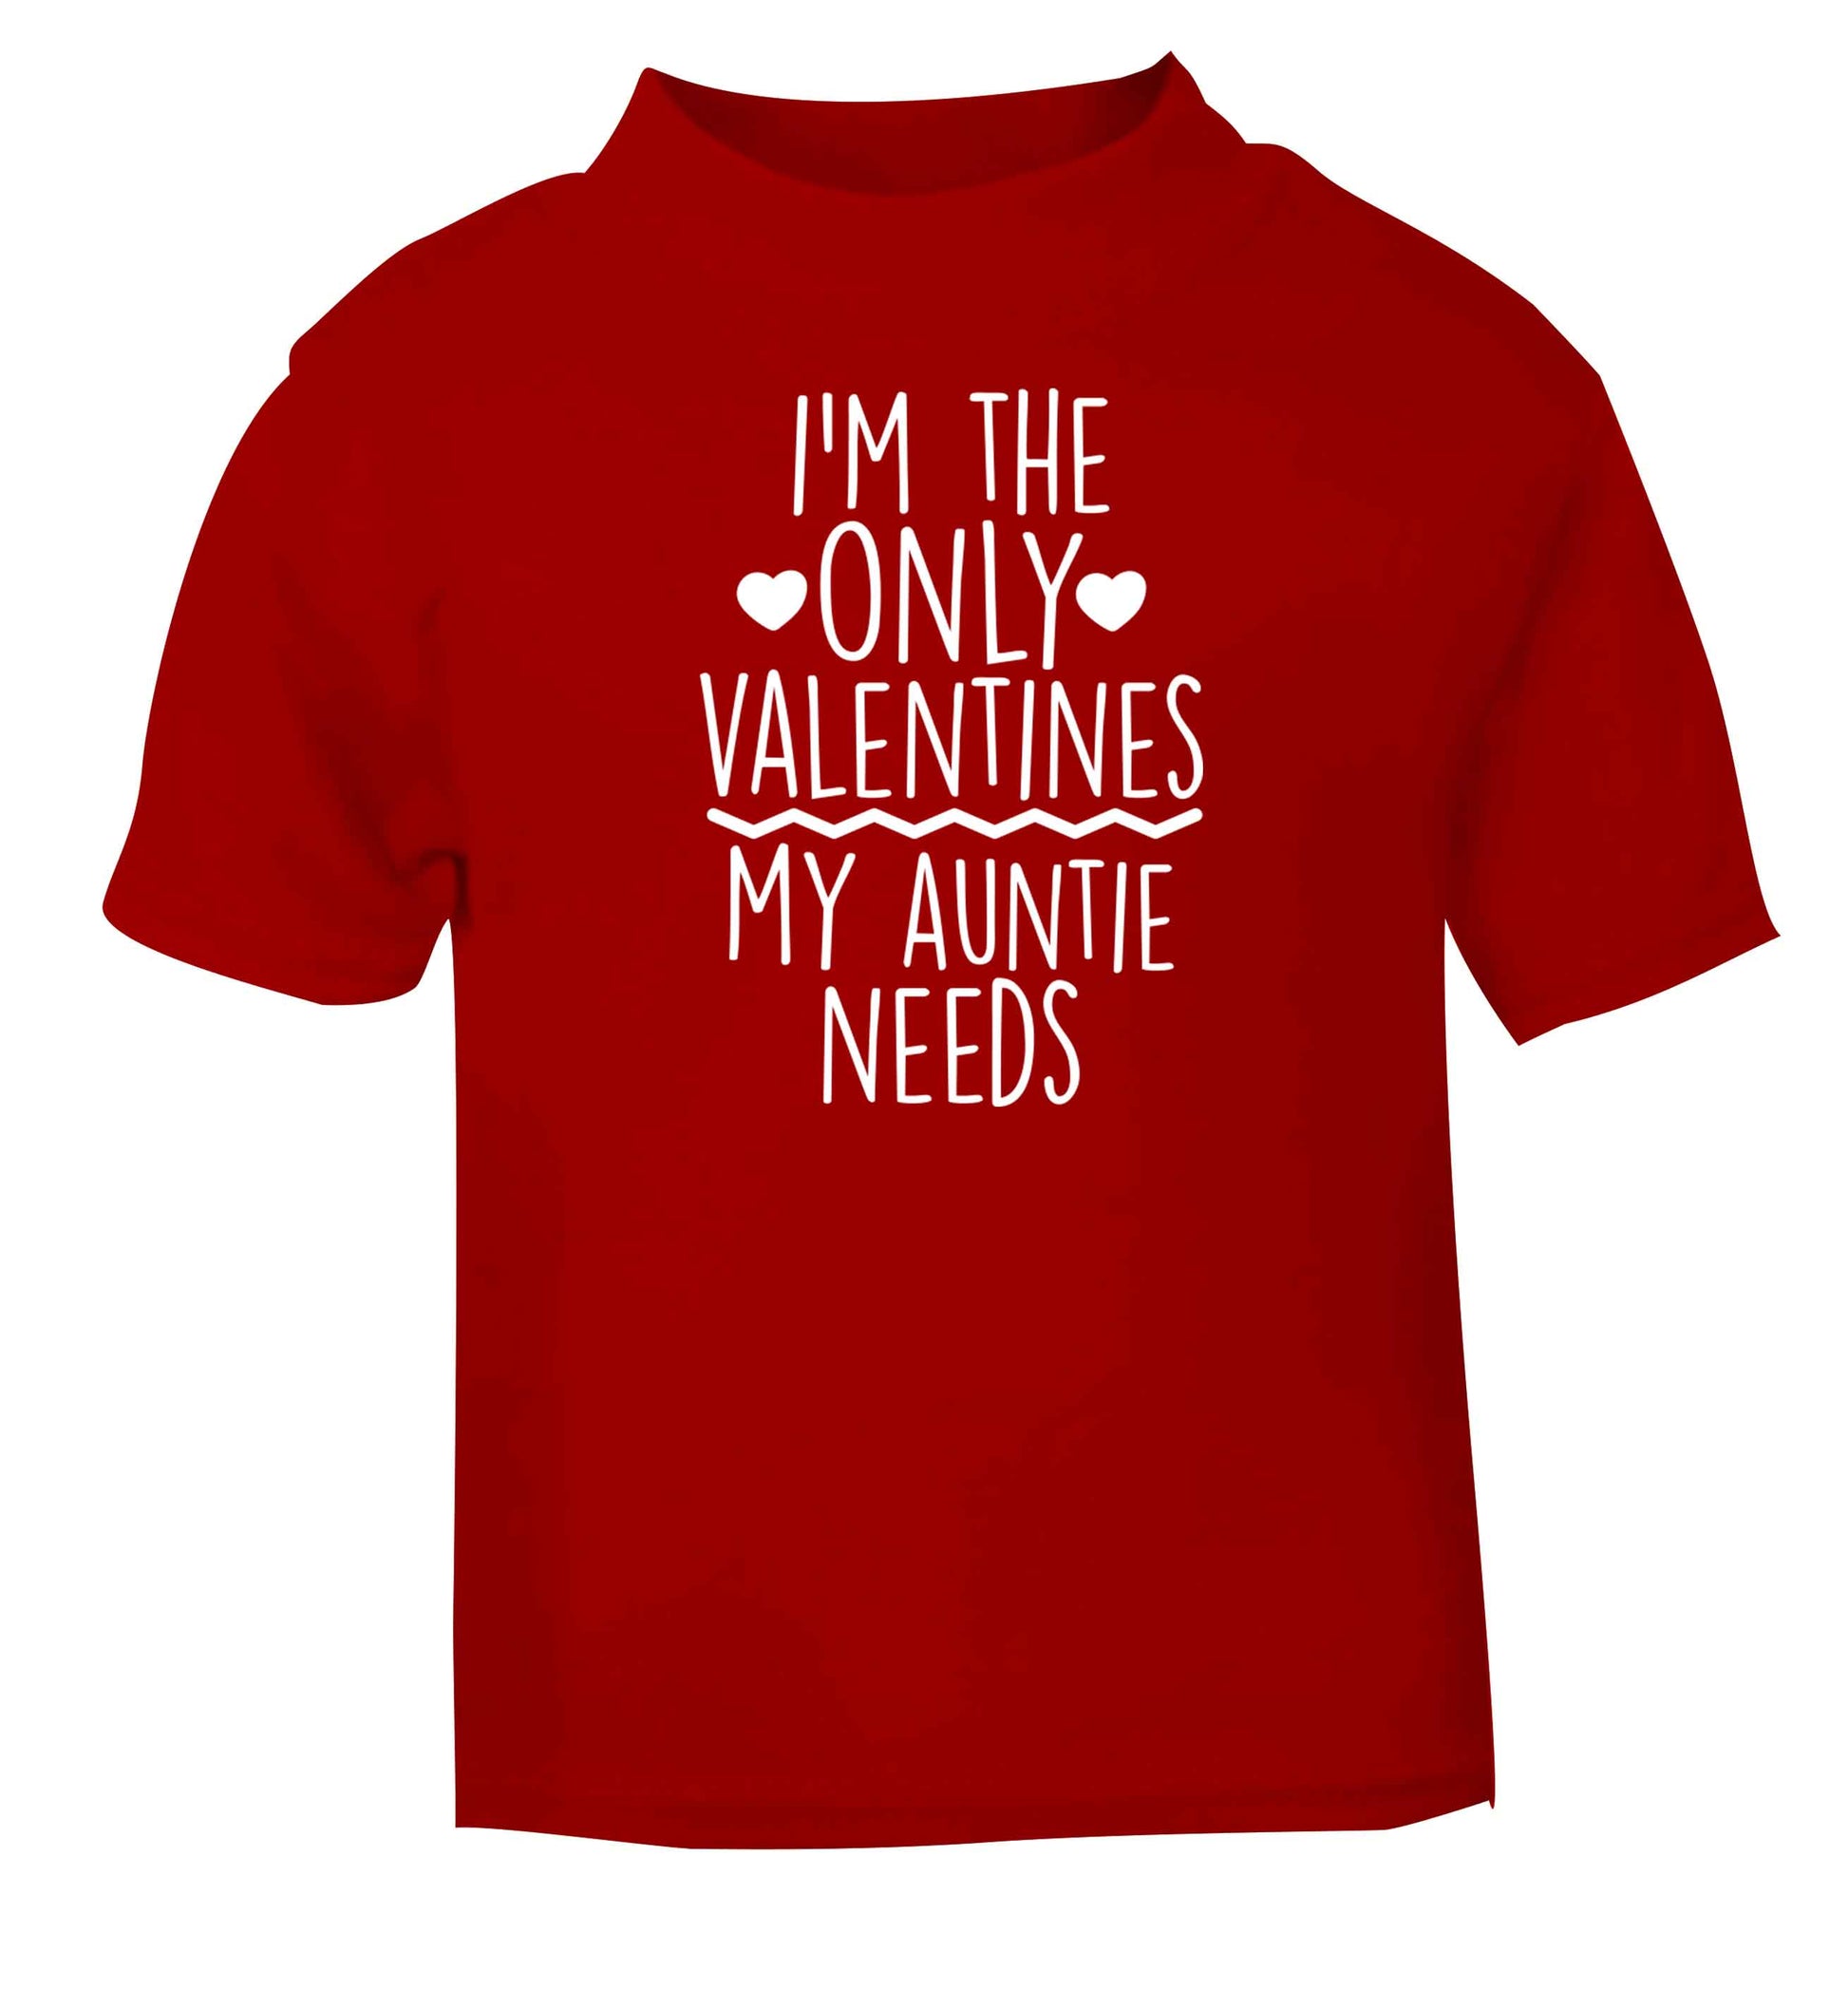 I'm the only valentines my auntie needs red baby toddler Tshirt 2 Years